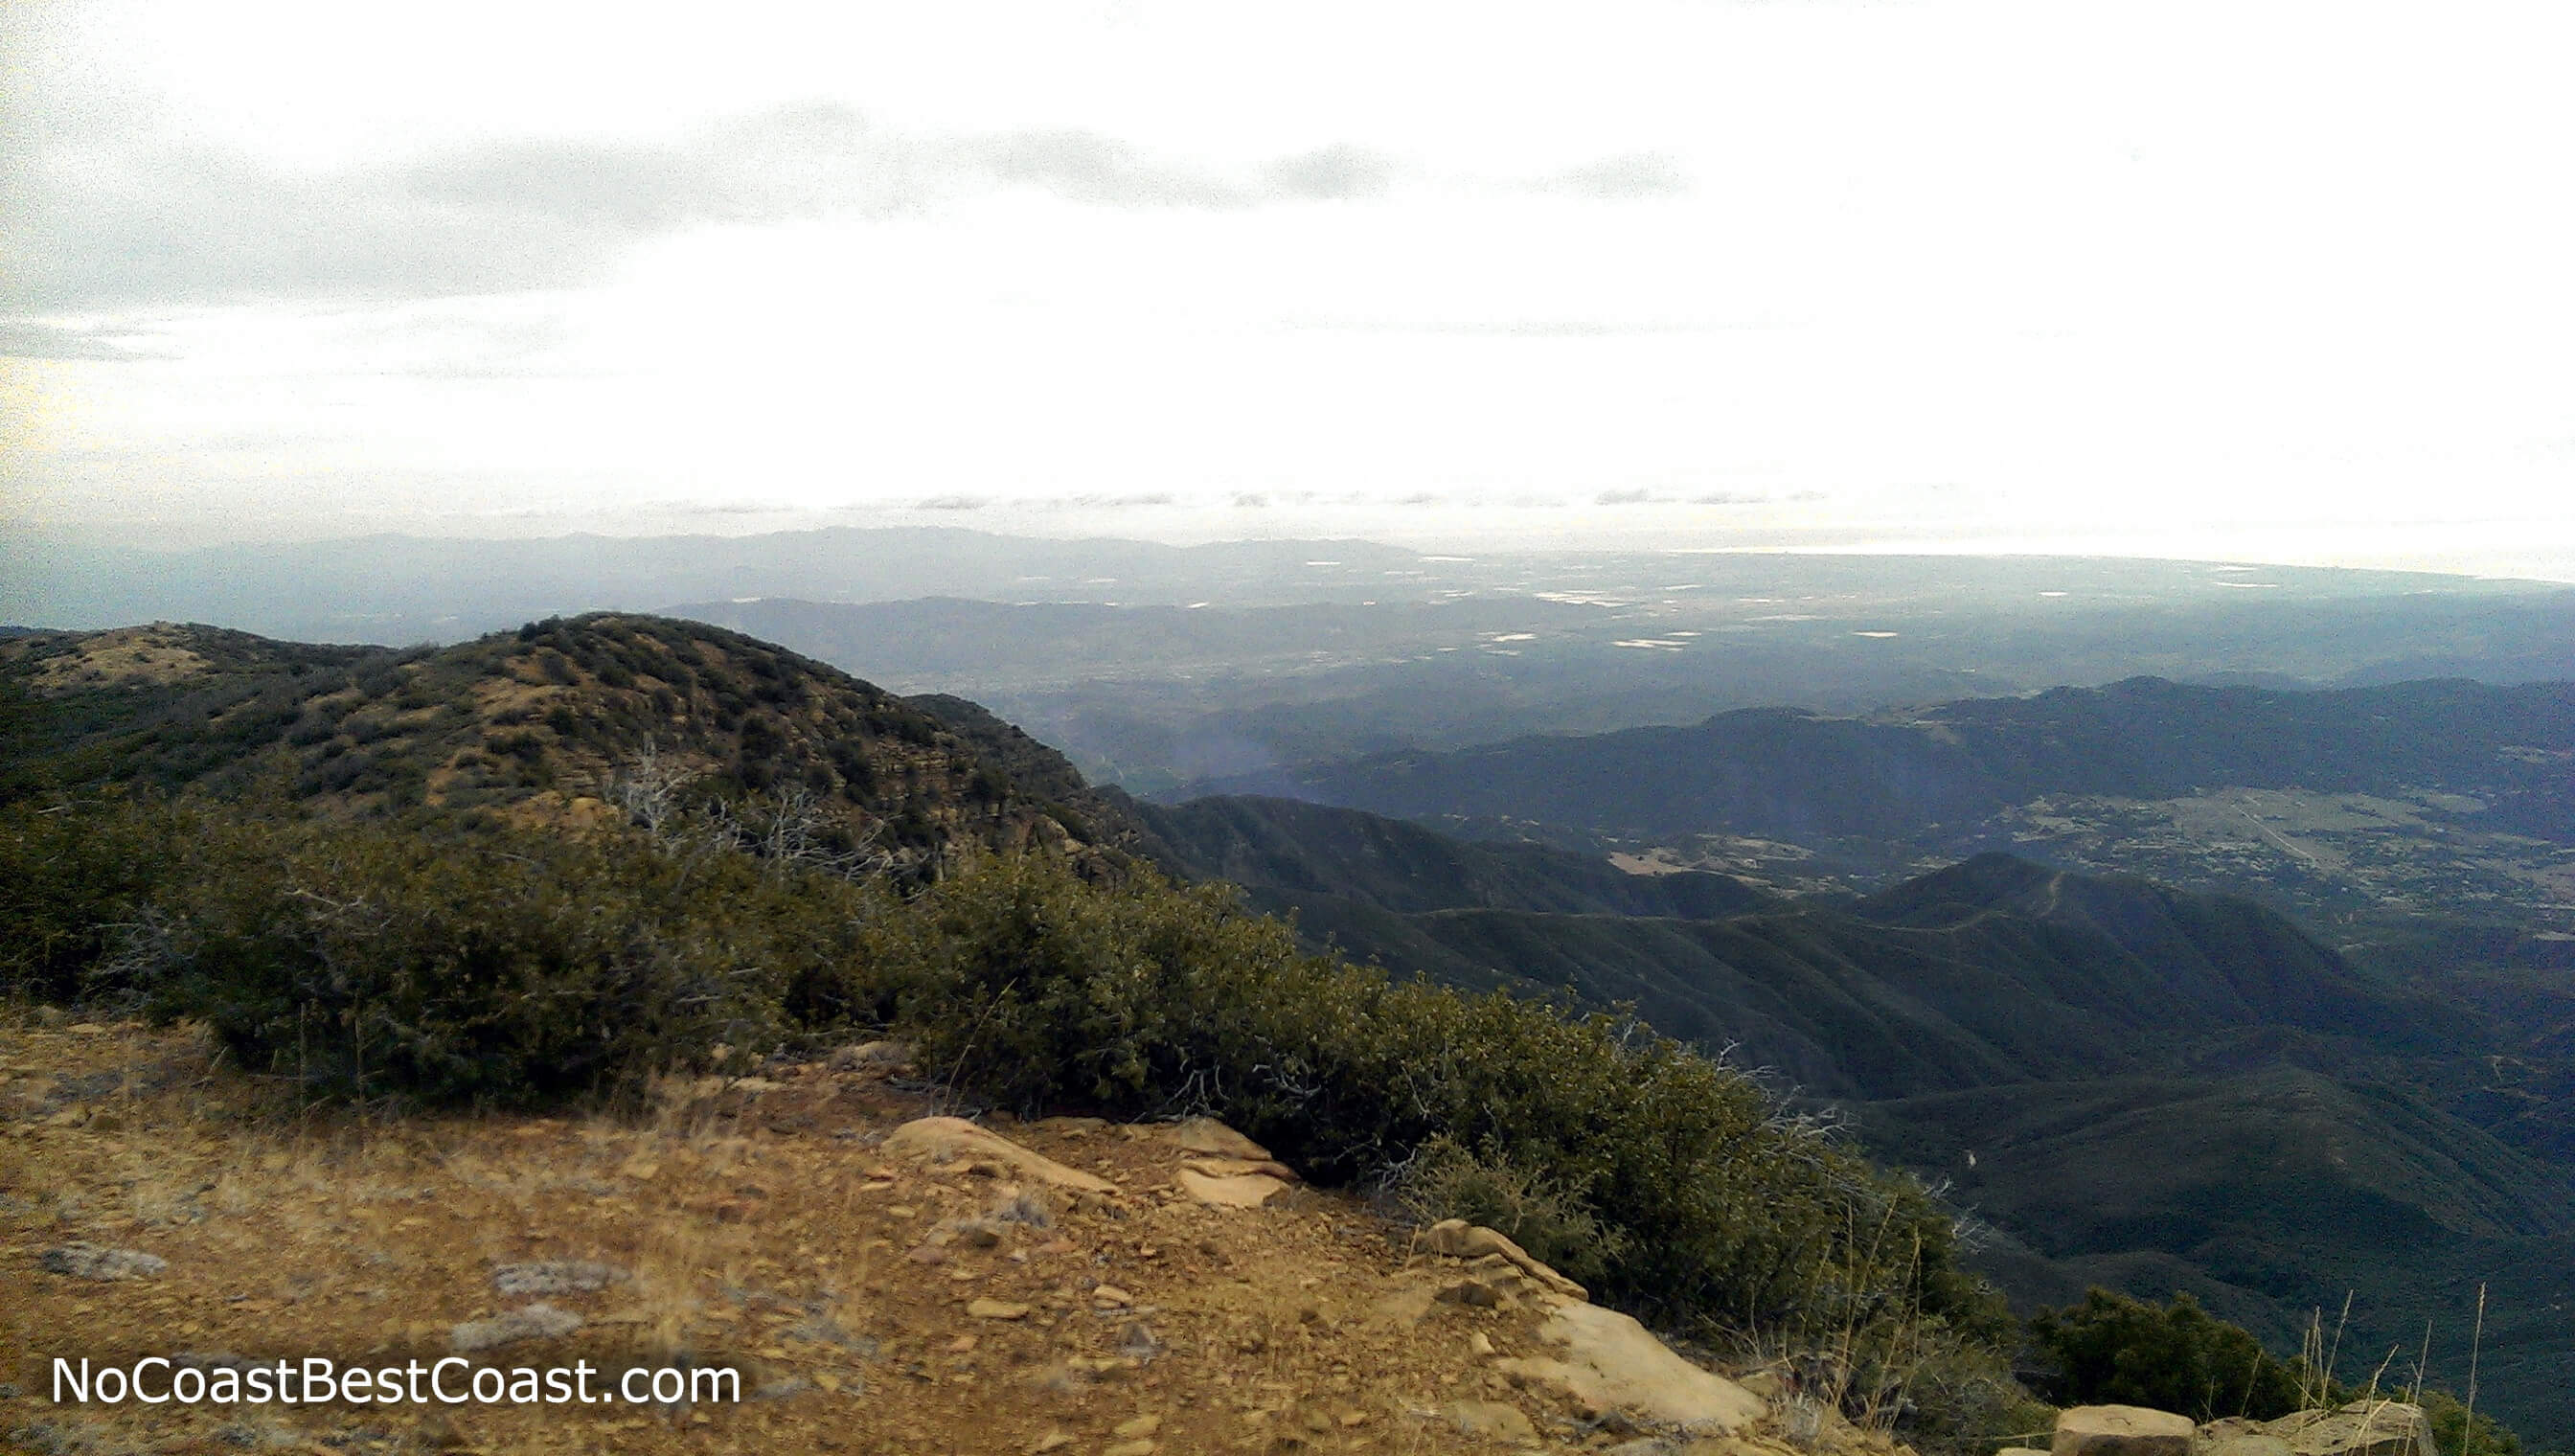 The Ojai Valley thousands of feet below with Ventura, Oxnard, and the Pacific Coast in the distance